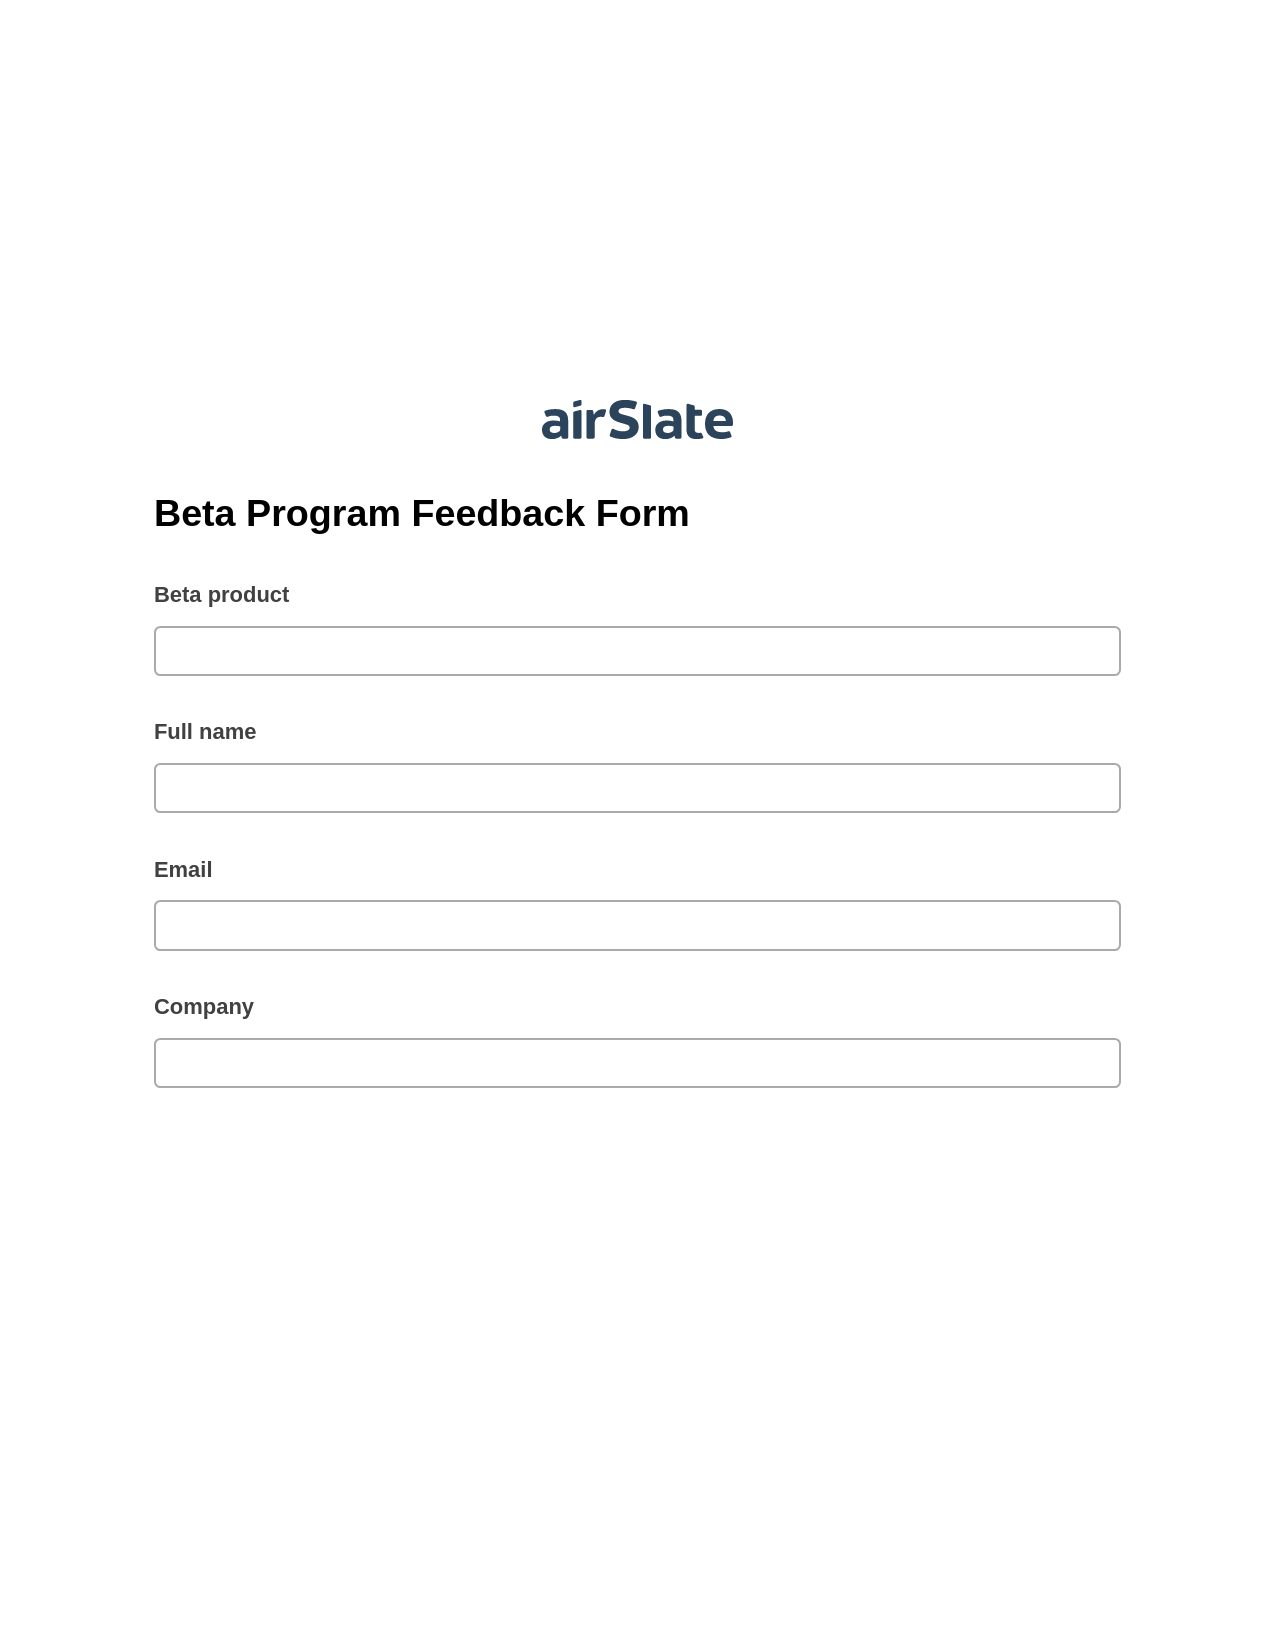 Multirole Beta Program Feedback Form Pre-fill Slate from MS Dynamics 365 Records Bot, Email Notification Bot, Export to NetSuite Record Bot